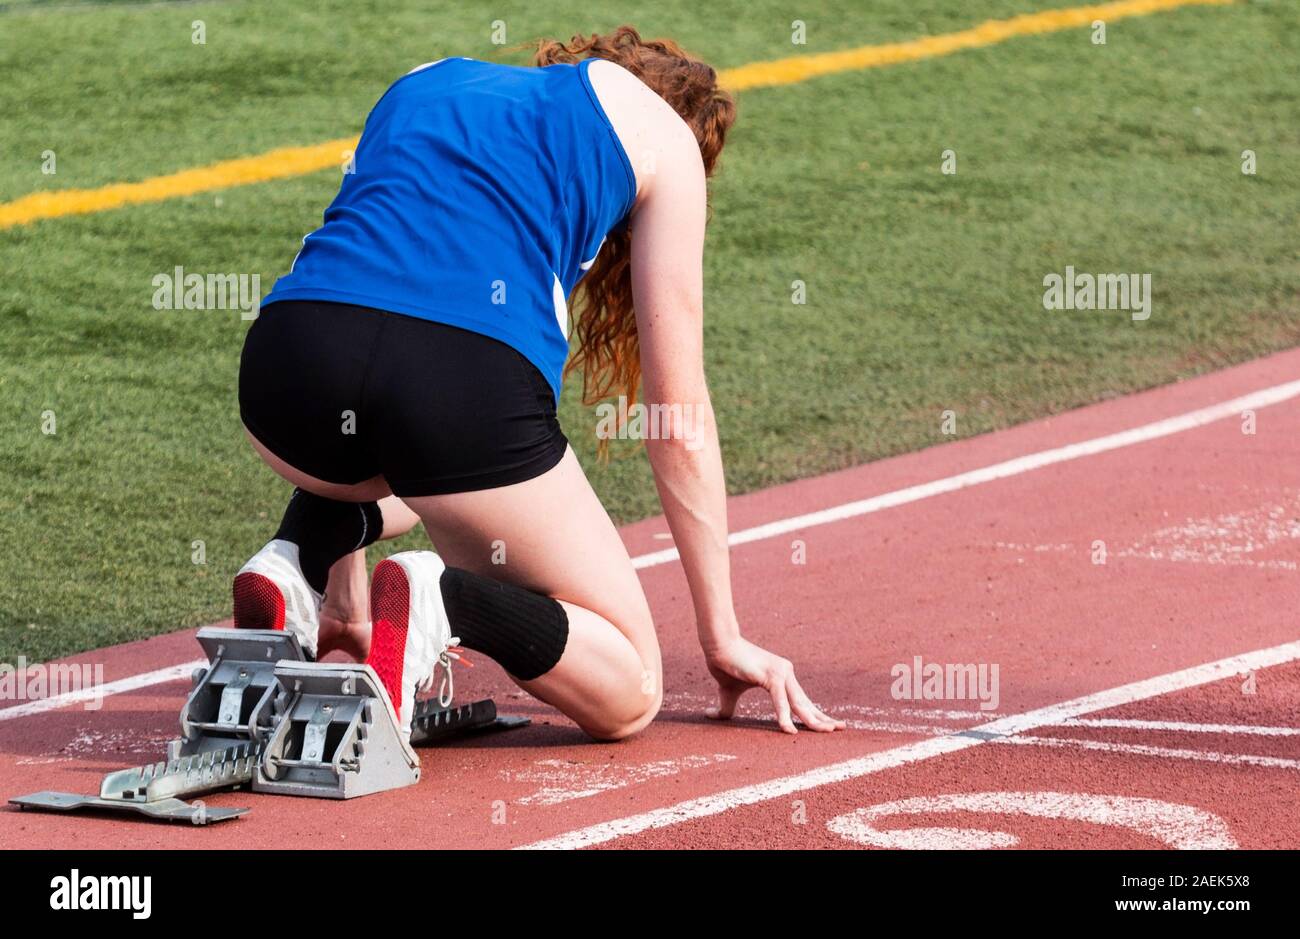 A high school female sprinter is in the starting blocks ready to start her sprint race on a red track outdoors. Stock Photo